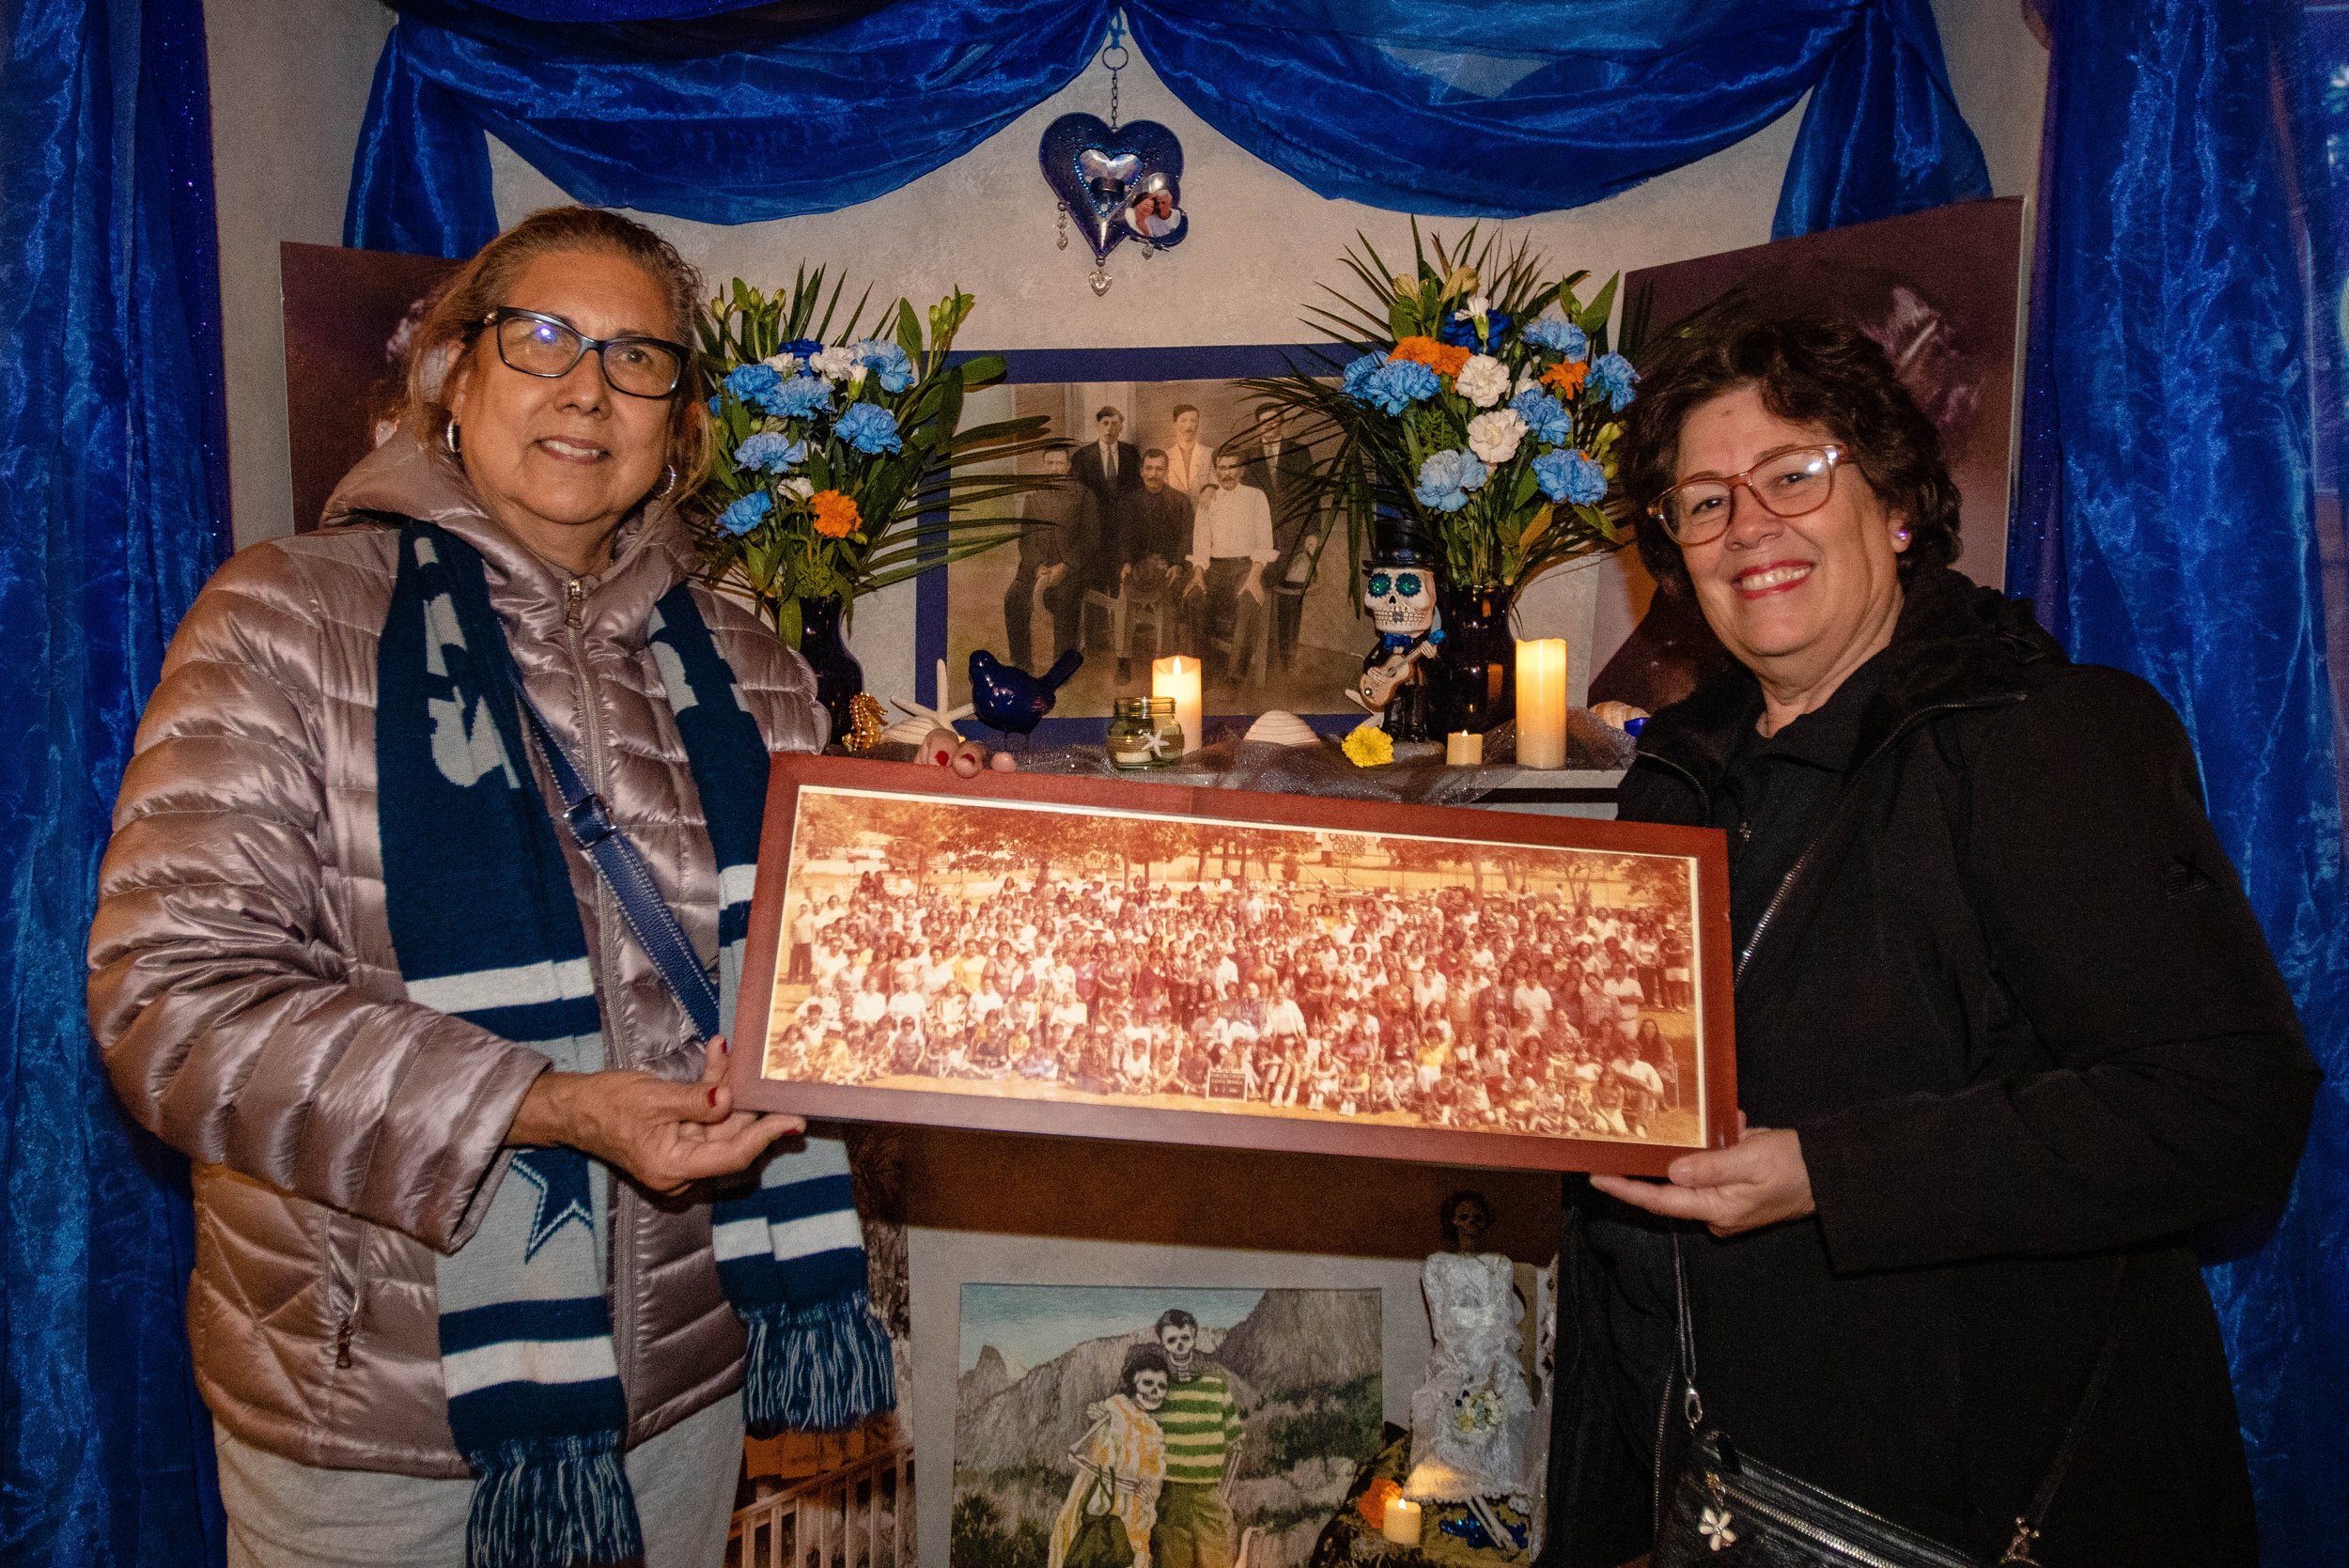  Cousins (L-R) Patricia Casillas and Blanca Casillas Nolan hold up a family photo taken during the year 1980 at one of the altars at the the Santa Monica Pier Día de los Muertos celebration on Nov. 2, 2022. Casillas and Nolan were both in their twent